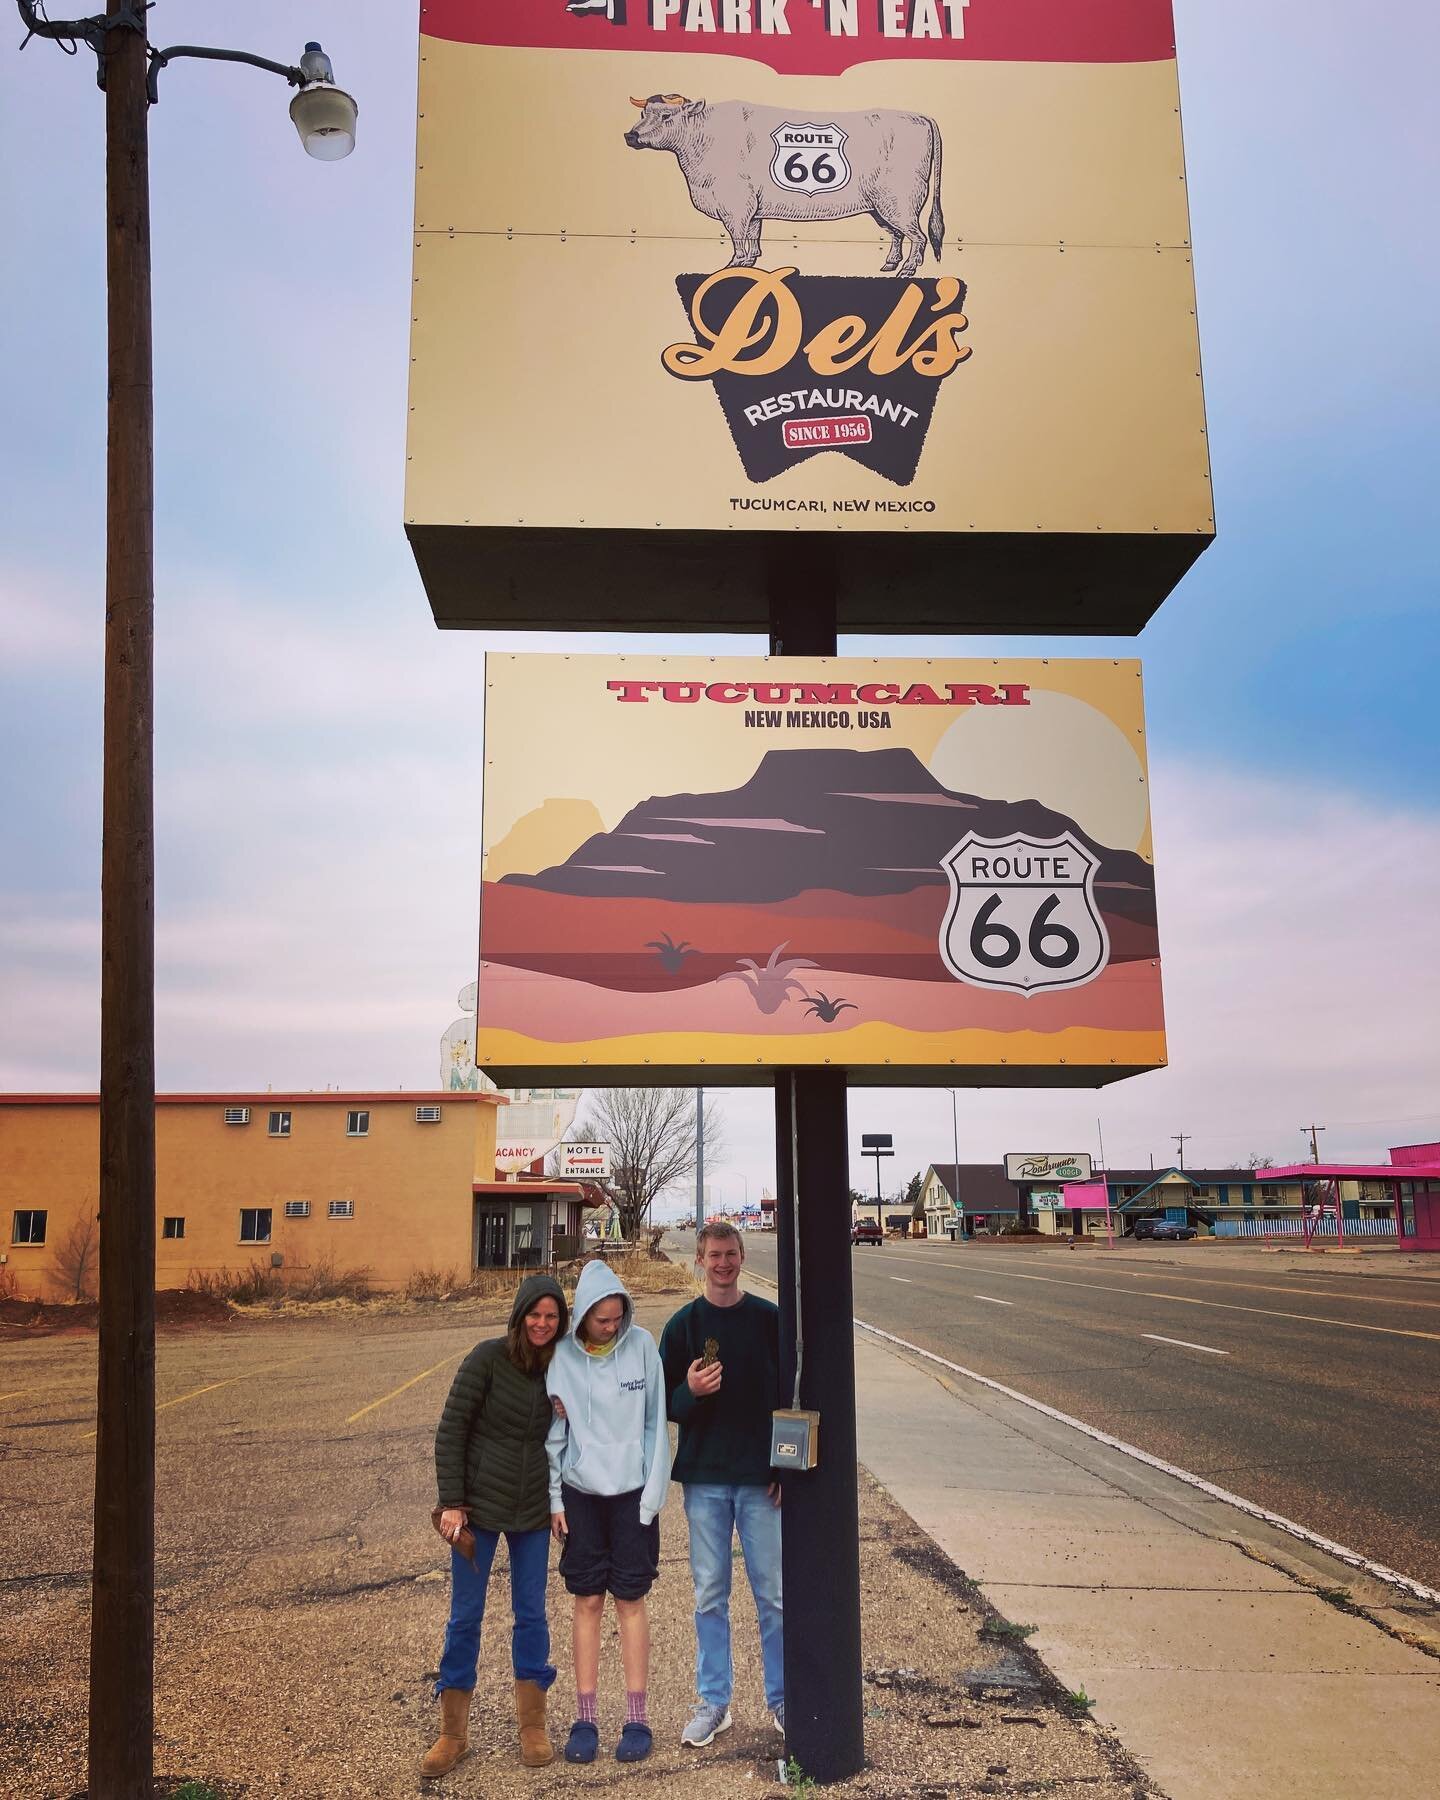 One of our stops on our amazing spring break travels. This quiet town was a fun respite from the road! #tucumcari #newmexico #springbreak #composerlife #family